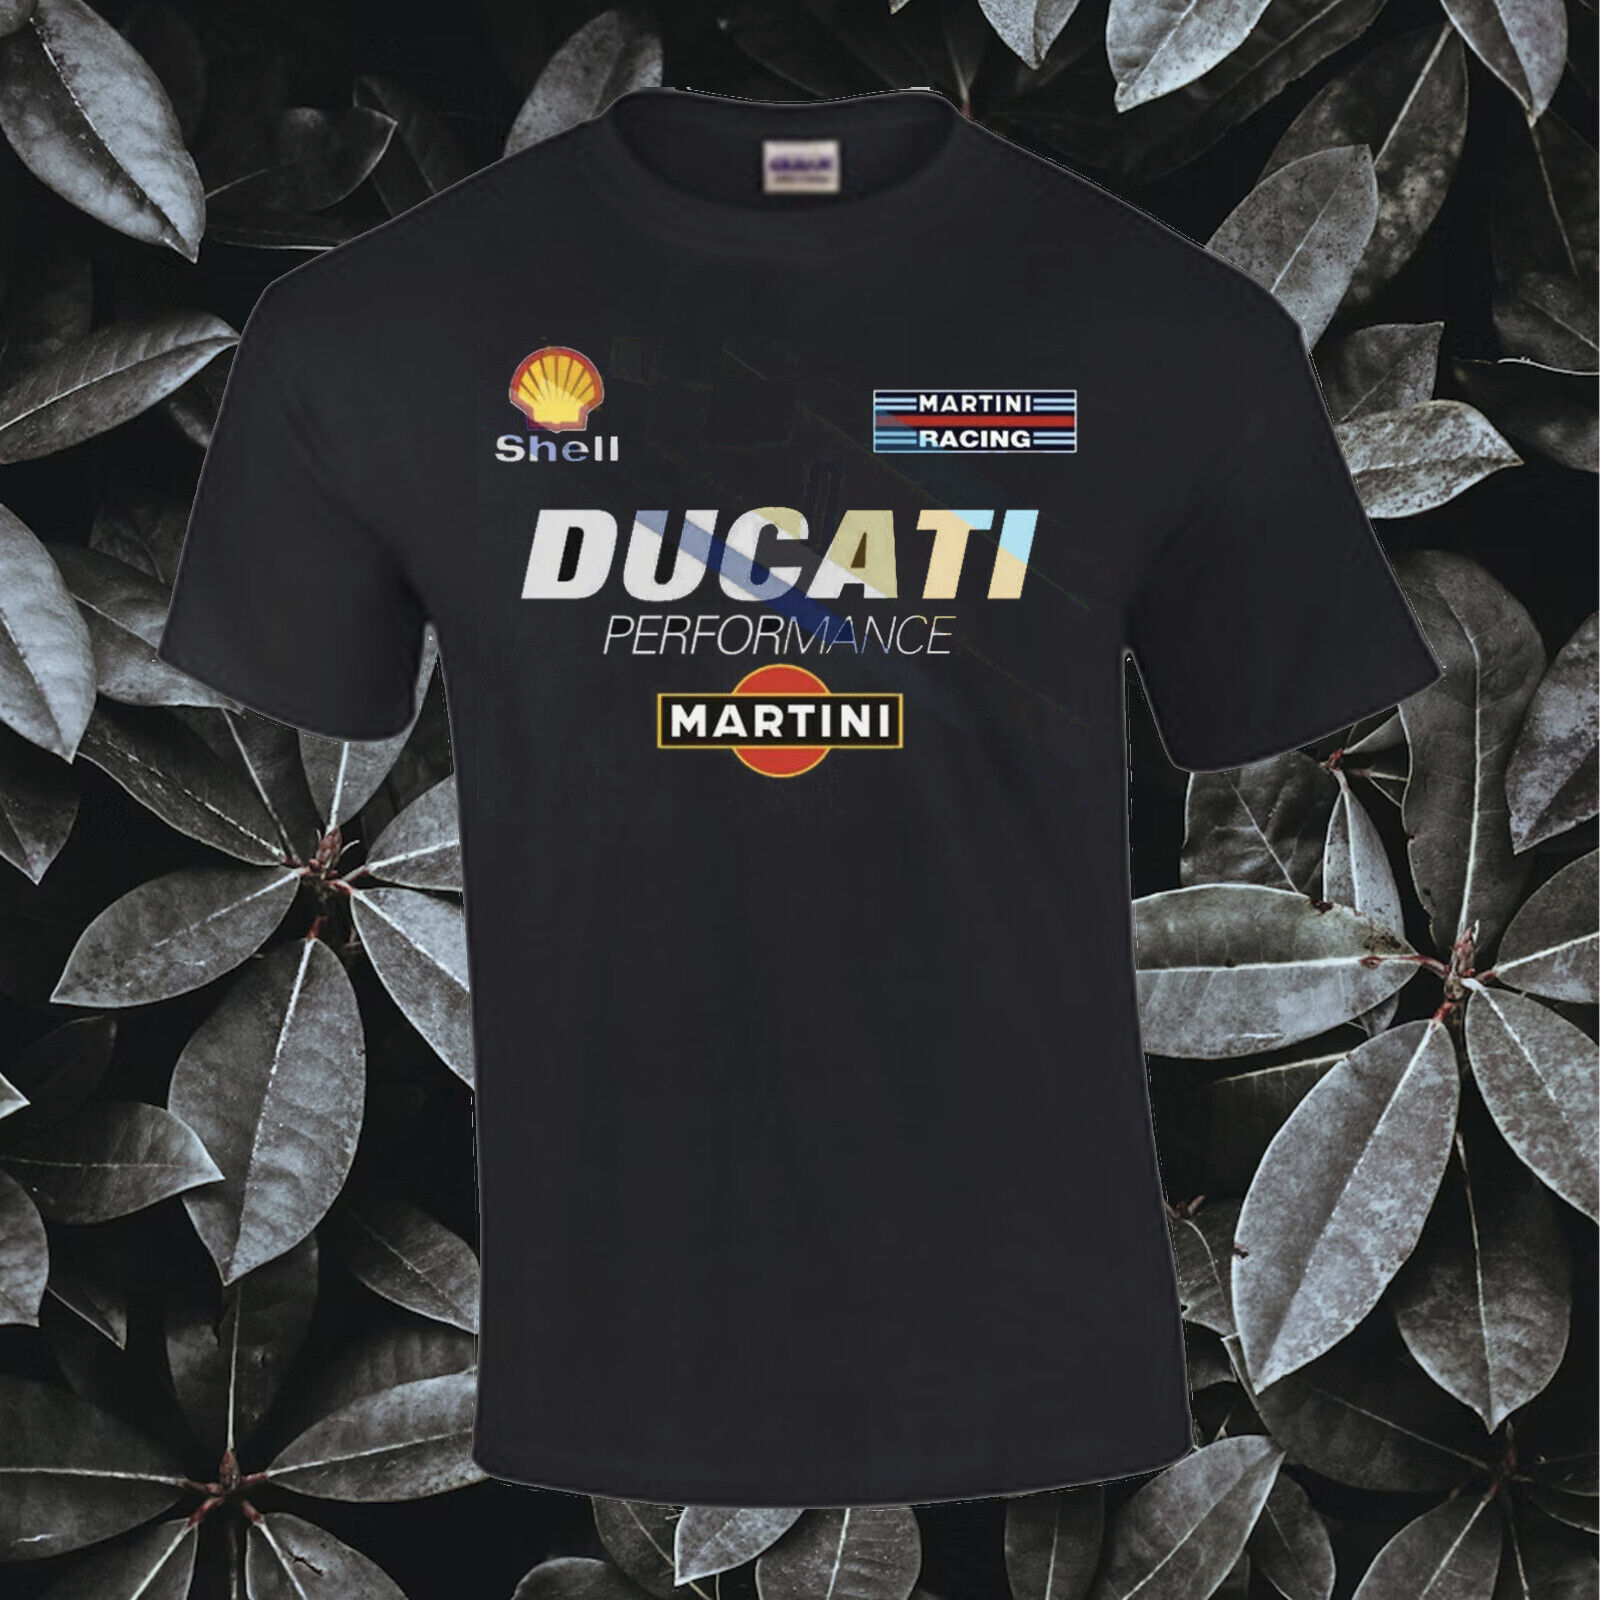 DUCATI PERFORMANCE MARTINI SHELL MOTORCYCLE SPORT RACING FUNNY T-SHIRT LIMITED